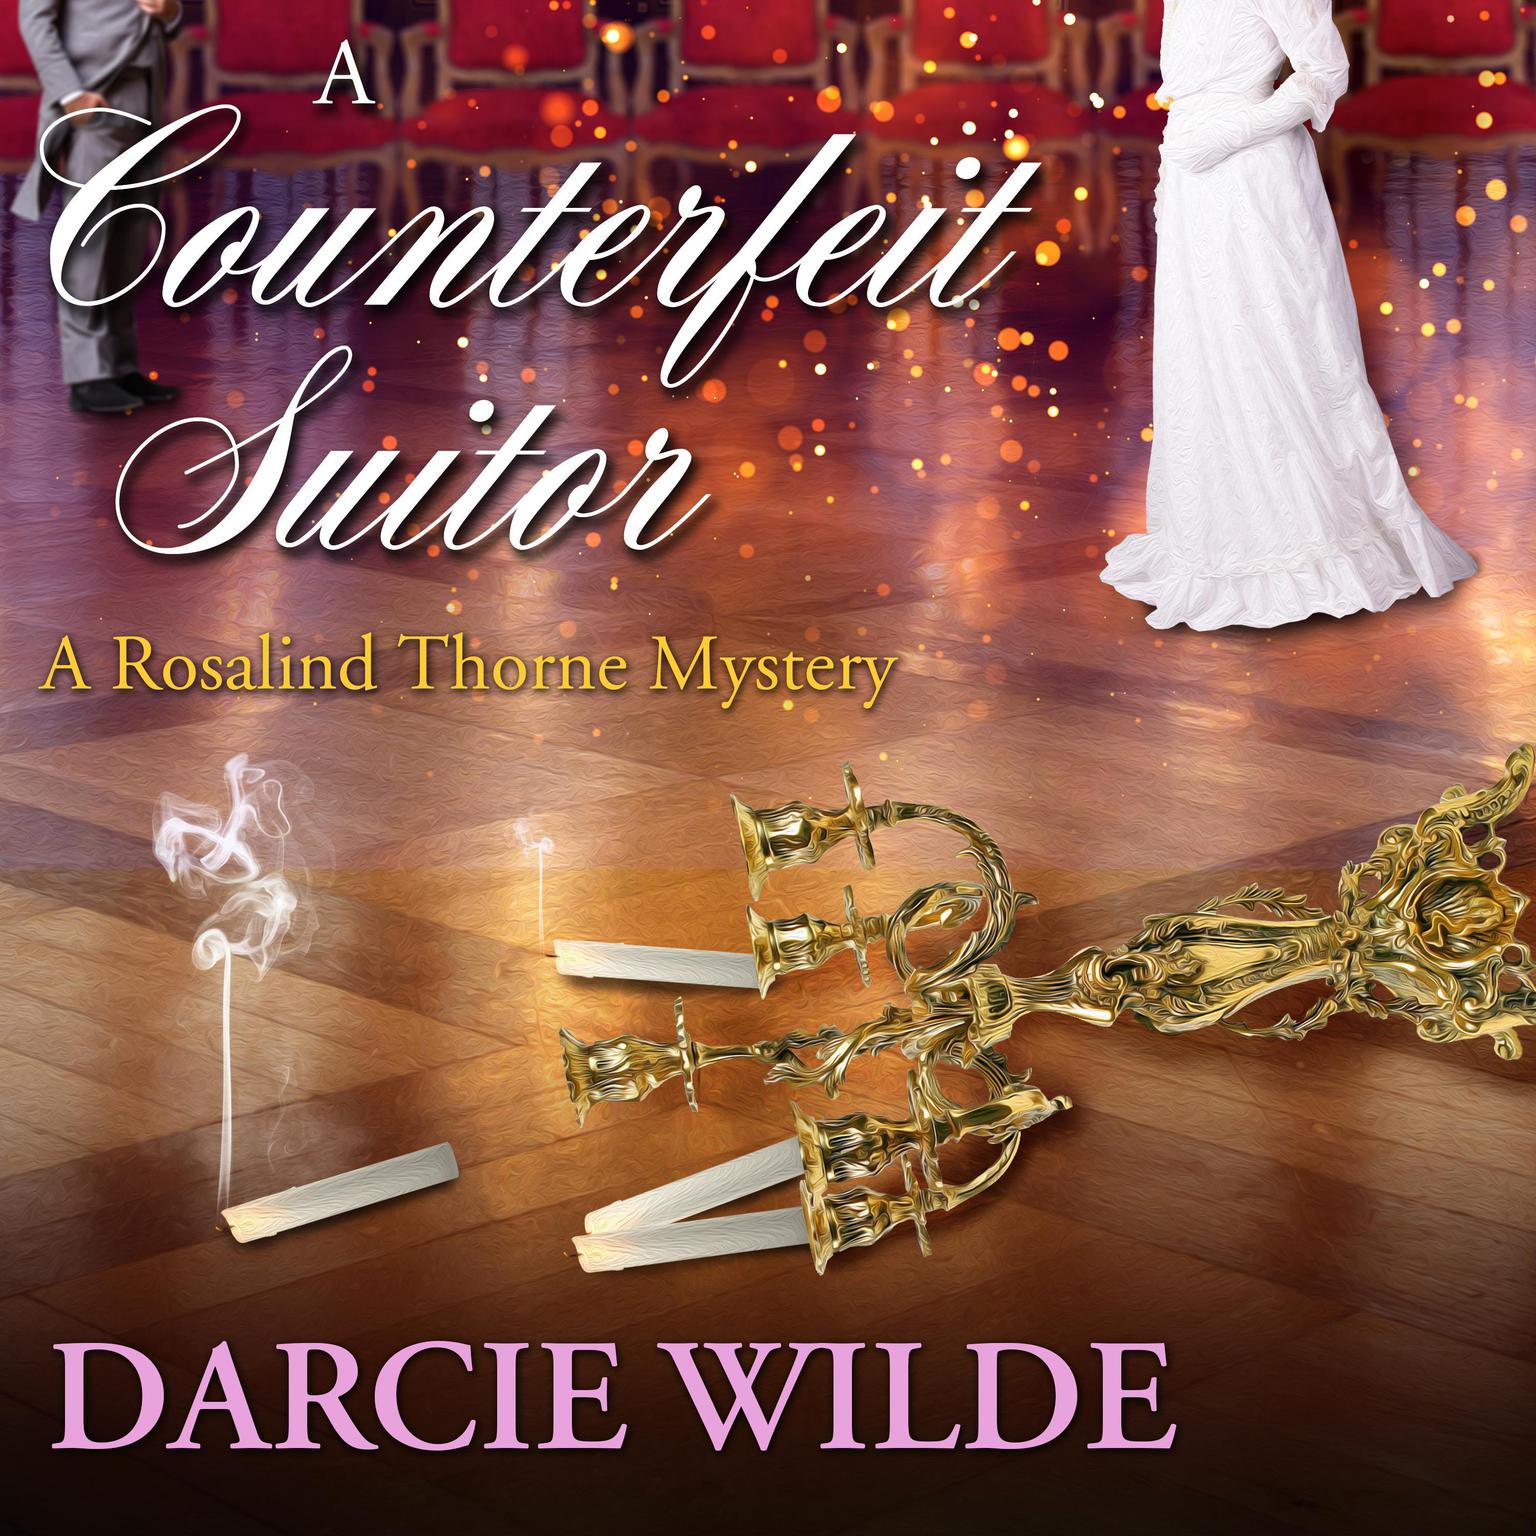 A Counterfeit Suitor Audiobook, by Darcie Wilde